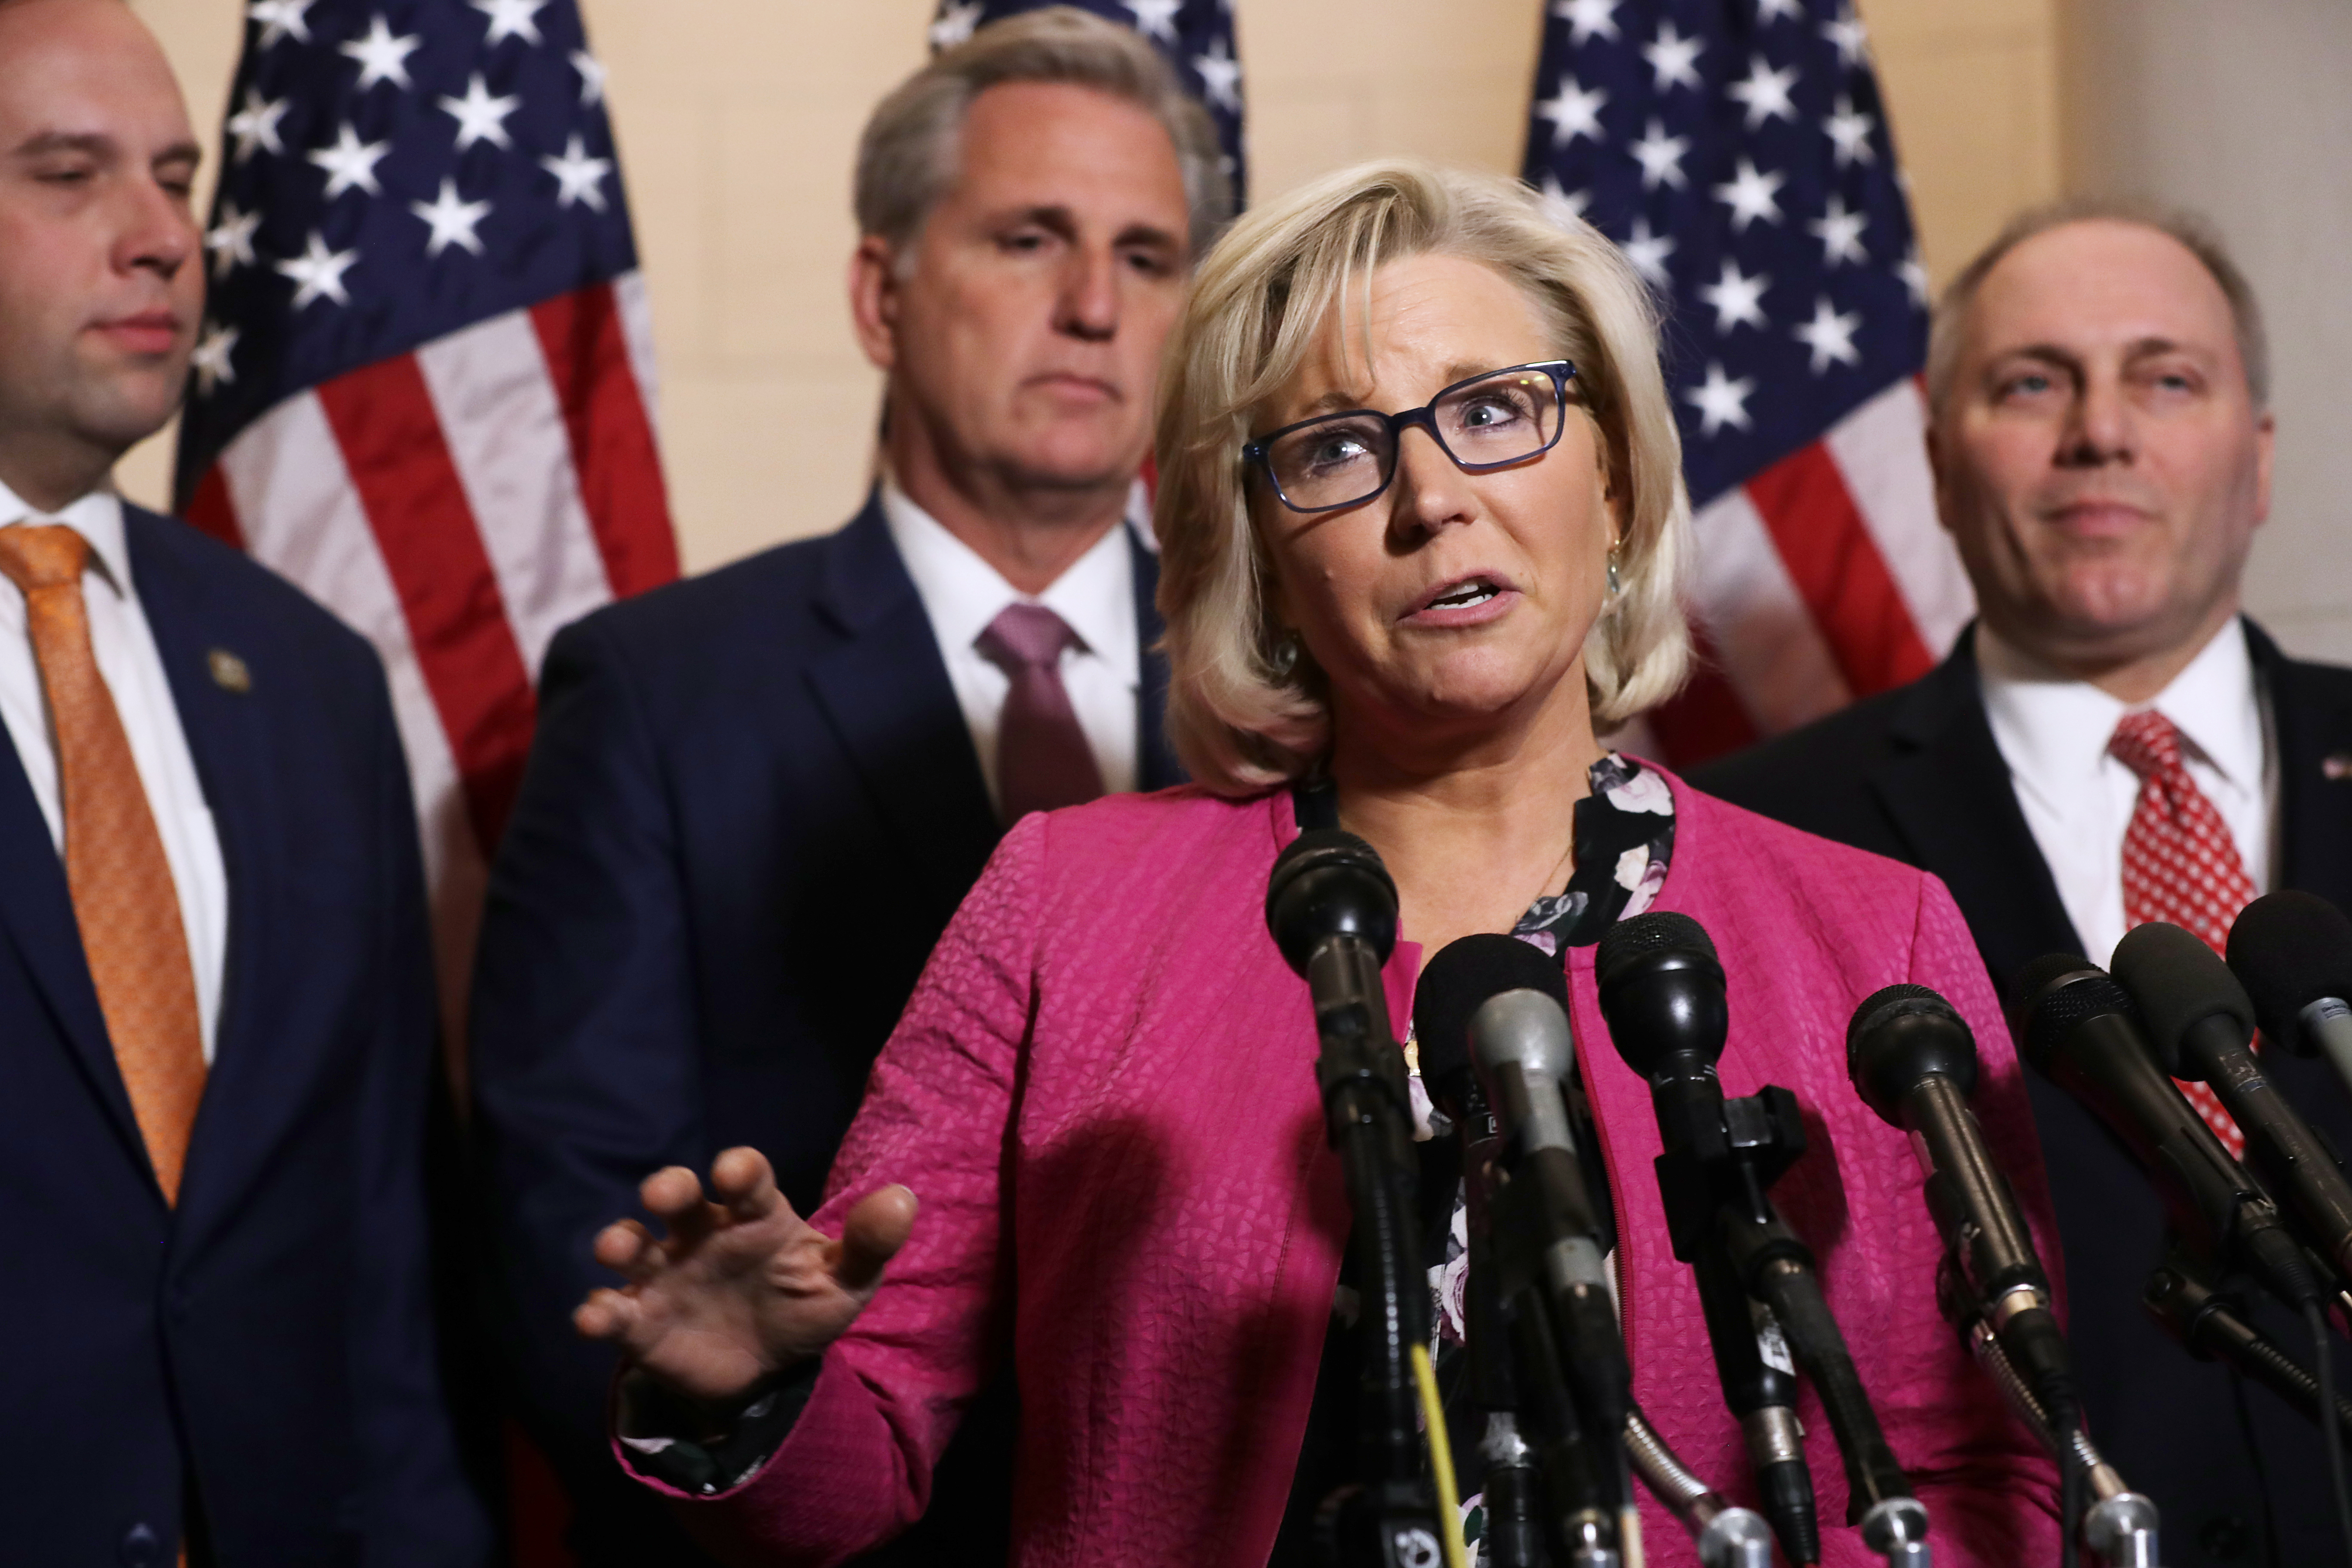 Rep. Liz Cheney, who was elected House Republican conference chair, talks to reporters following House GOP leadership elections with (L-R) Rep. Jason Smith, House Majority Leader Kevin McCarthy and House Majority Whip Steve Scalise, in the Longworth House Office Building on Capitol Hill November 14, 2018 in Washington, DC. (Photo by Chip Somodevilla/Getty Images)